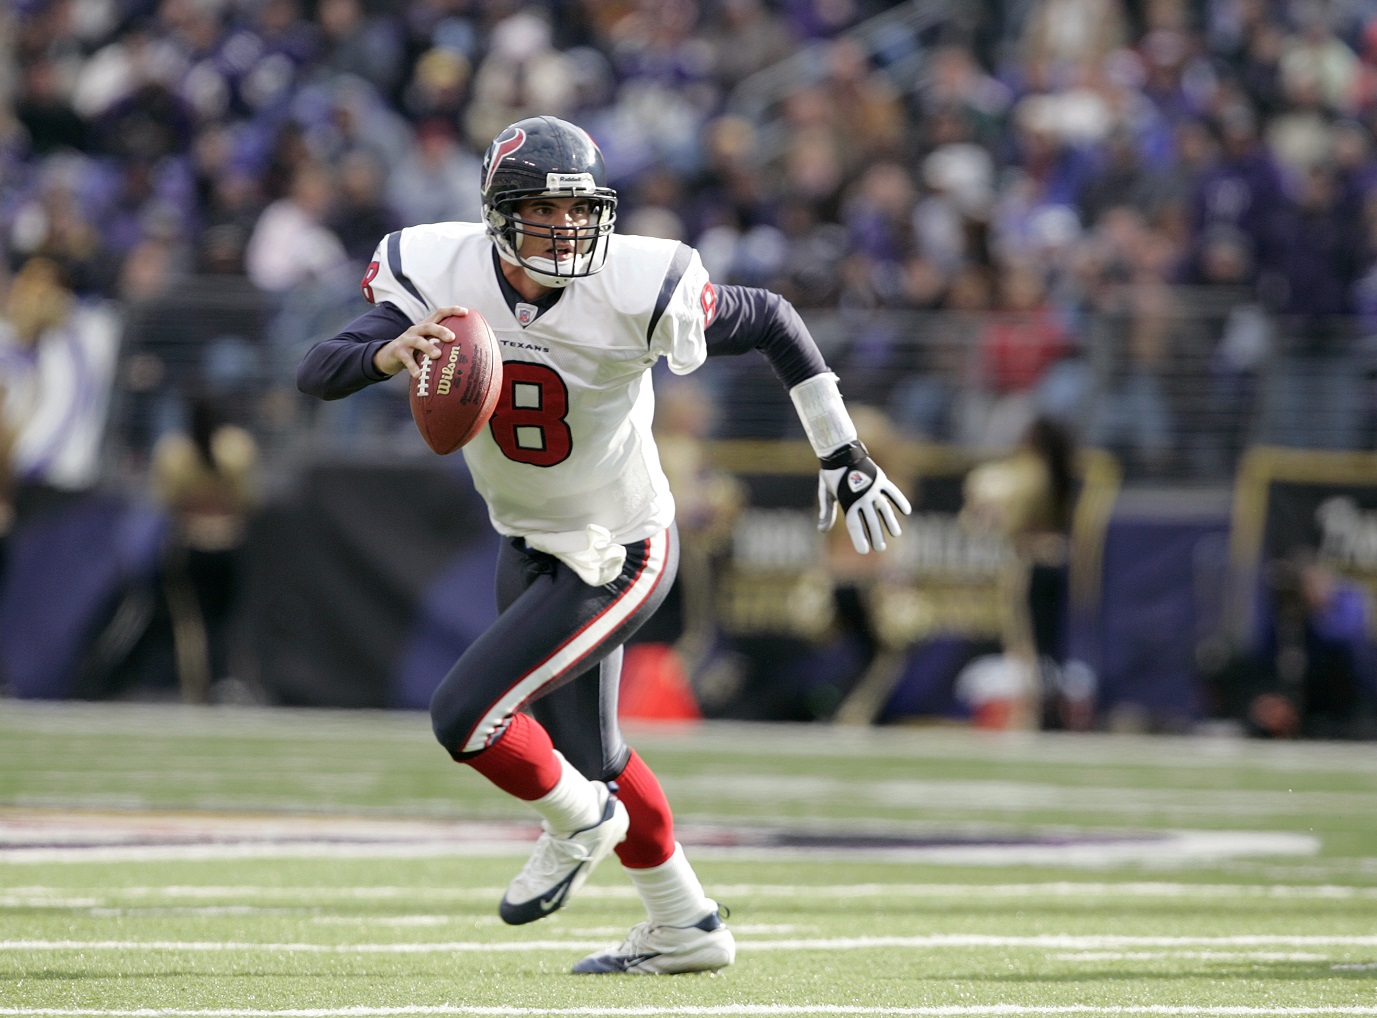 Houston Texans quarterback David Carr runs out of the pocket looking for a receiver during the first half against the Baltimore Ravens Sunday, Dec. 4, 2005 in Baltimore.(AP Photo/Chris Gardner)